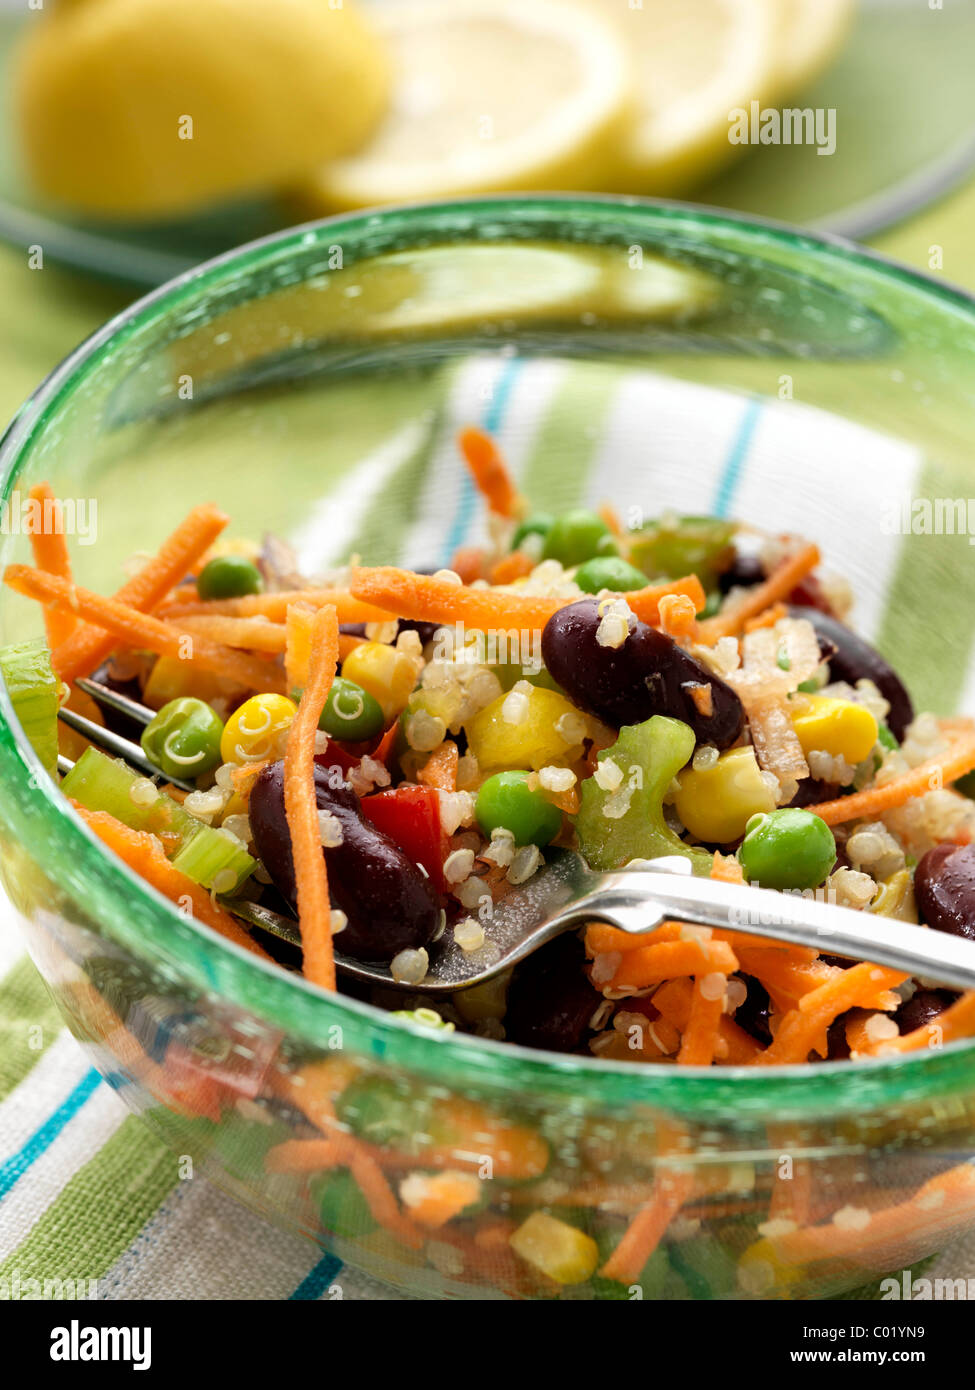 Vegetarian quinoa salad with peas carrots celery red kidney beans Stock Photo